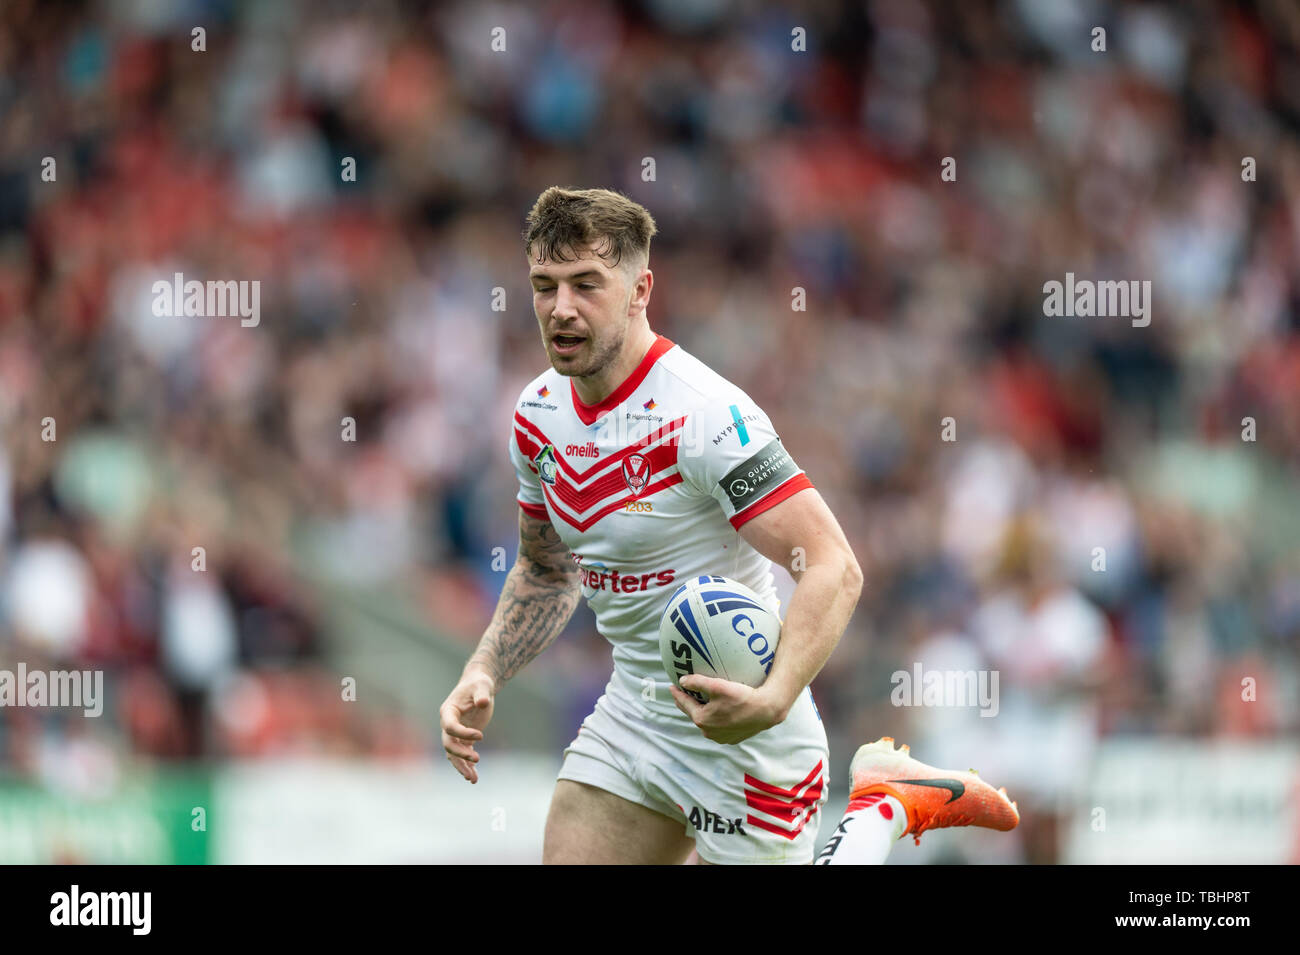 1st June 2019 , Totally Wicked Stadium, St Helens, England; Coral Challenge Cup 2019, Quarter Final , St Helens vs Wakefield Trinity ; Mark Percival of St Helens on his way to score   Credit: Richard Long/News Images Stock Photo